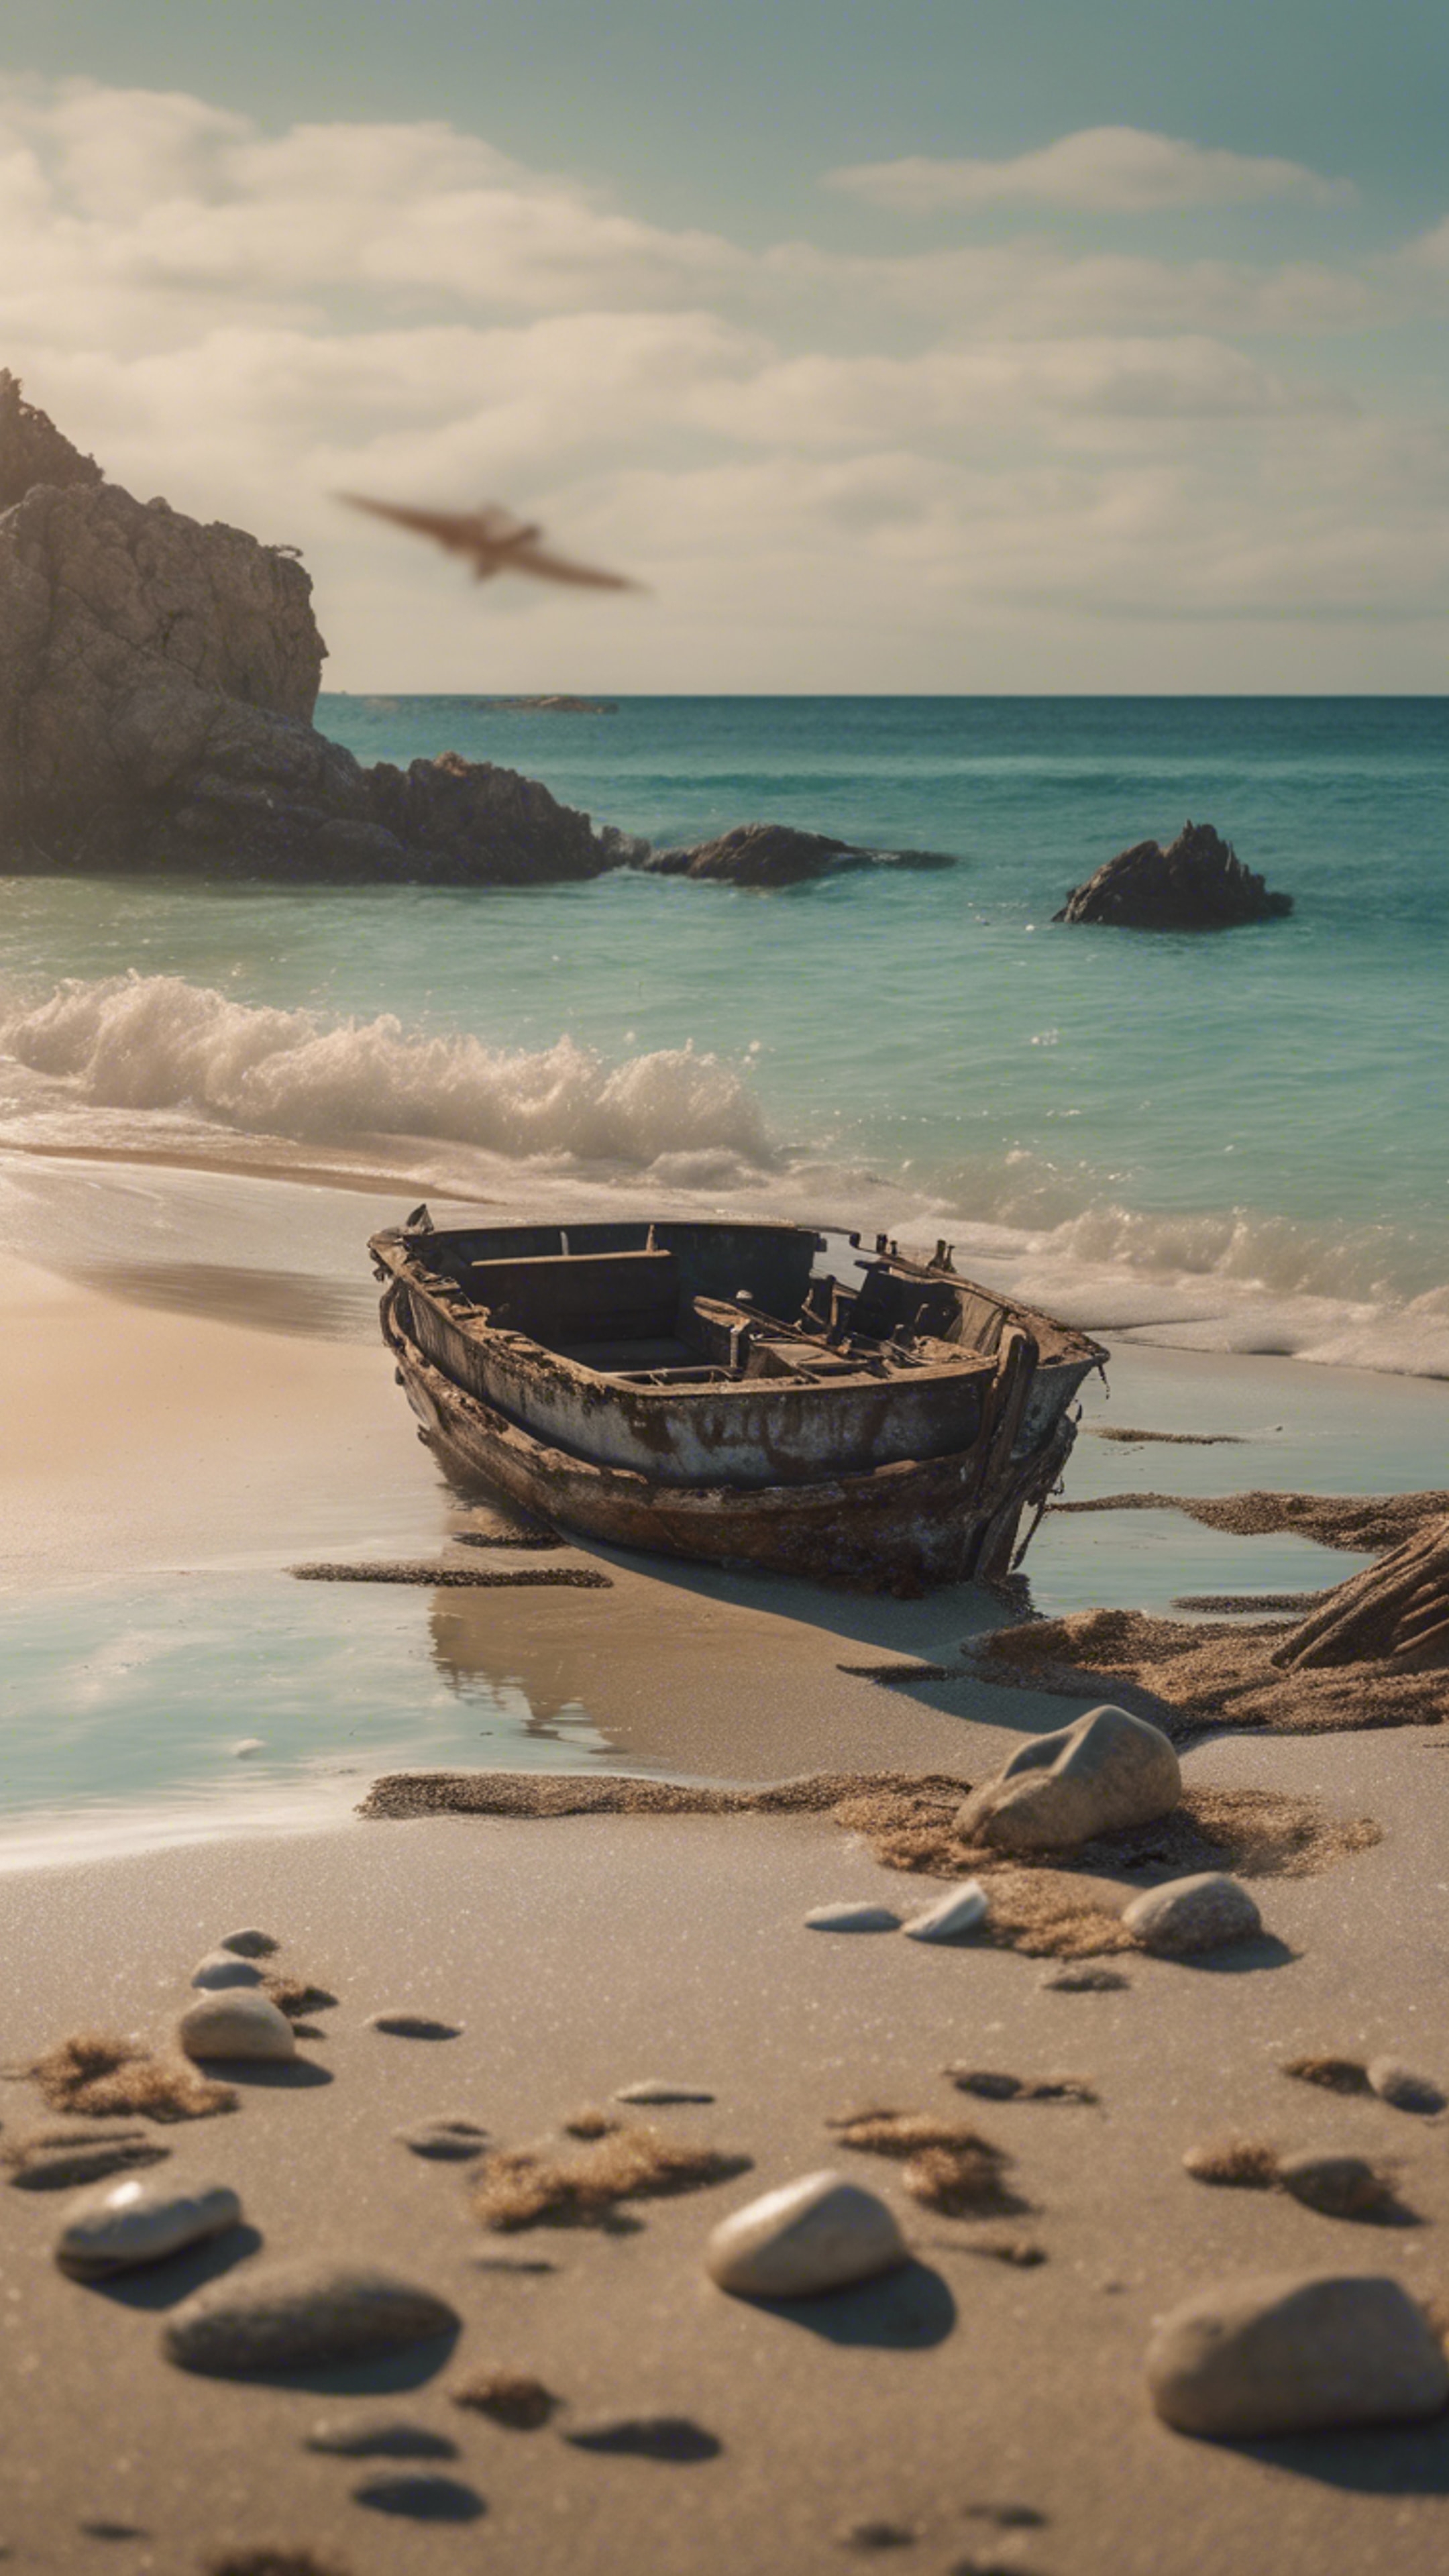 A beautiful beach scene with a sunken shipwreck close to the shore, attracting an array of sea life.壁紙[e2d64654cf4d4b428f4d]